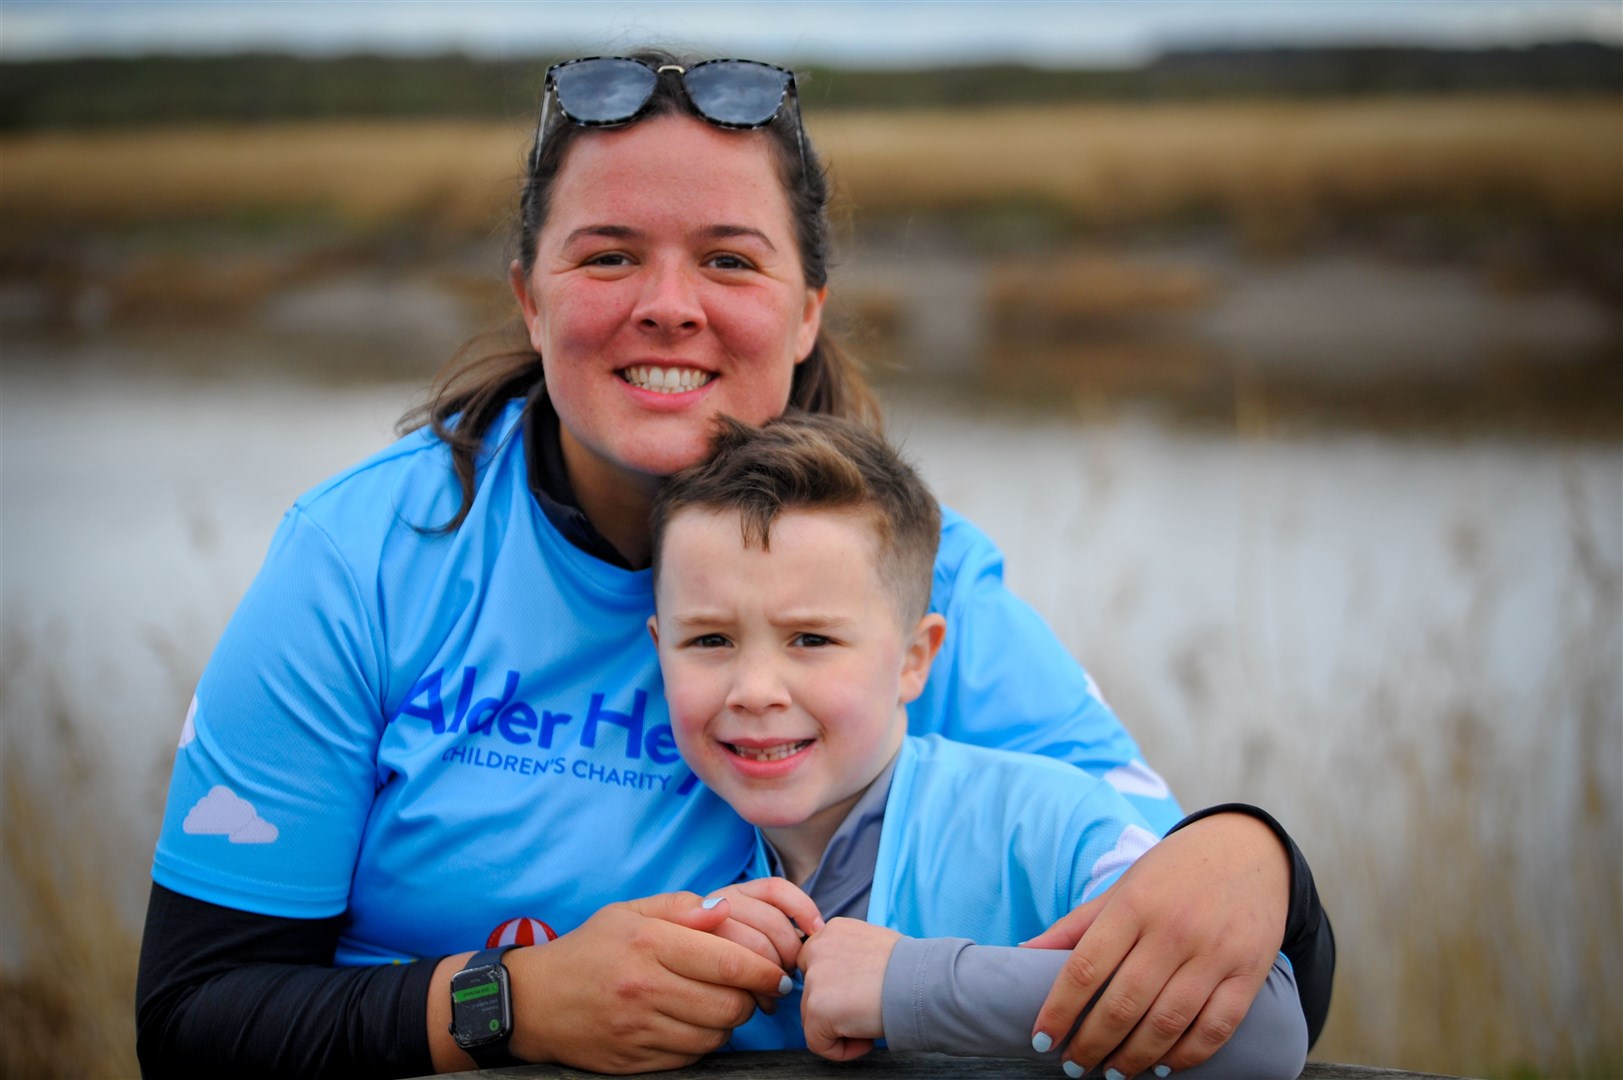 Naiomi Goodman said she is ‘so proud’ of her son for completing the challenge (JustGiving)